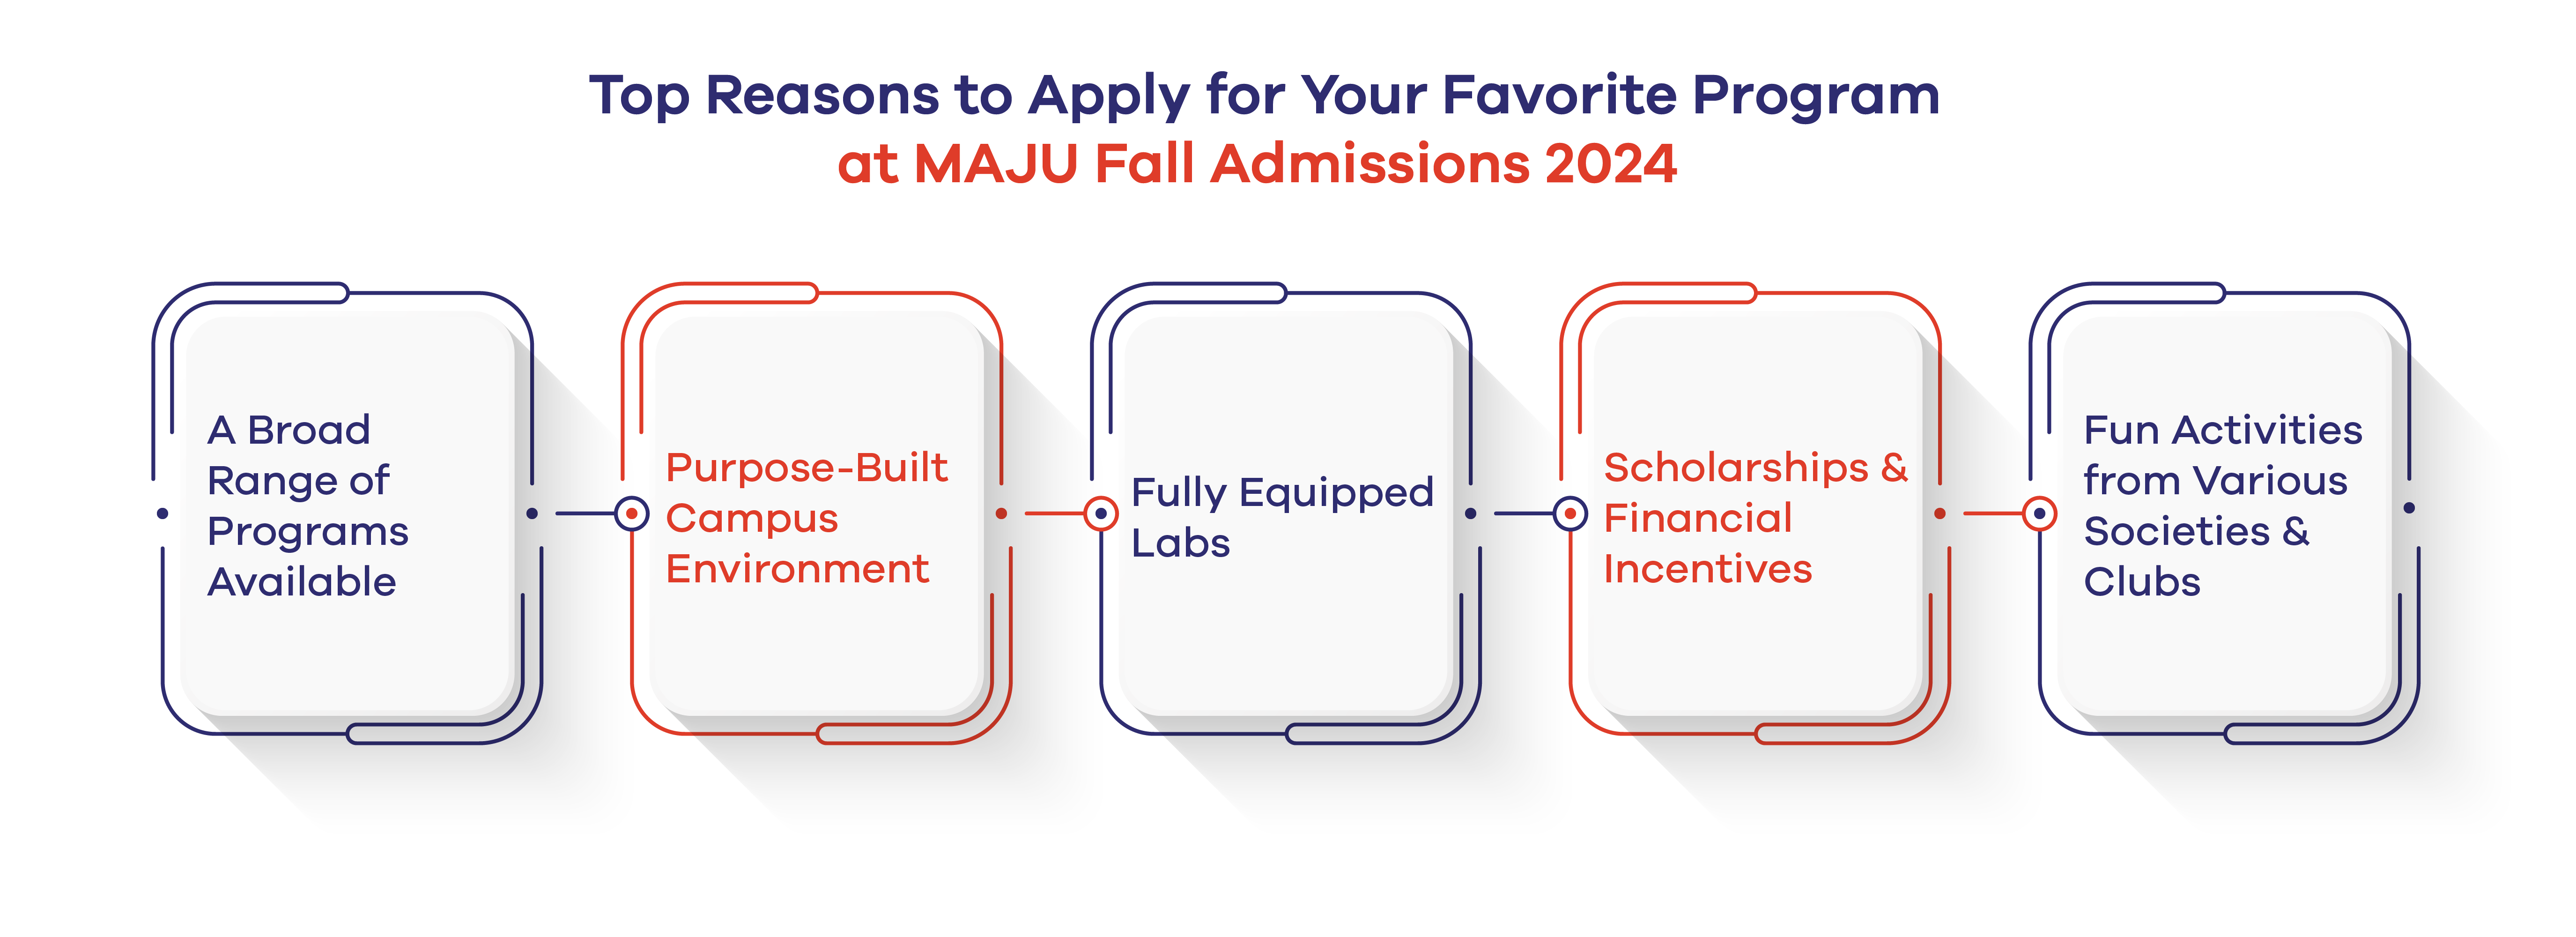 Top Reasons to Apply for Your Favorite Program at MAJU Fall Admissions 2024   